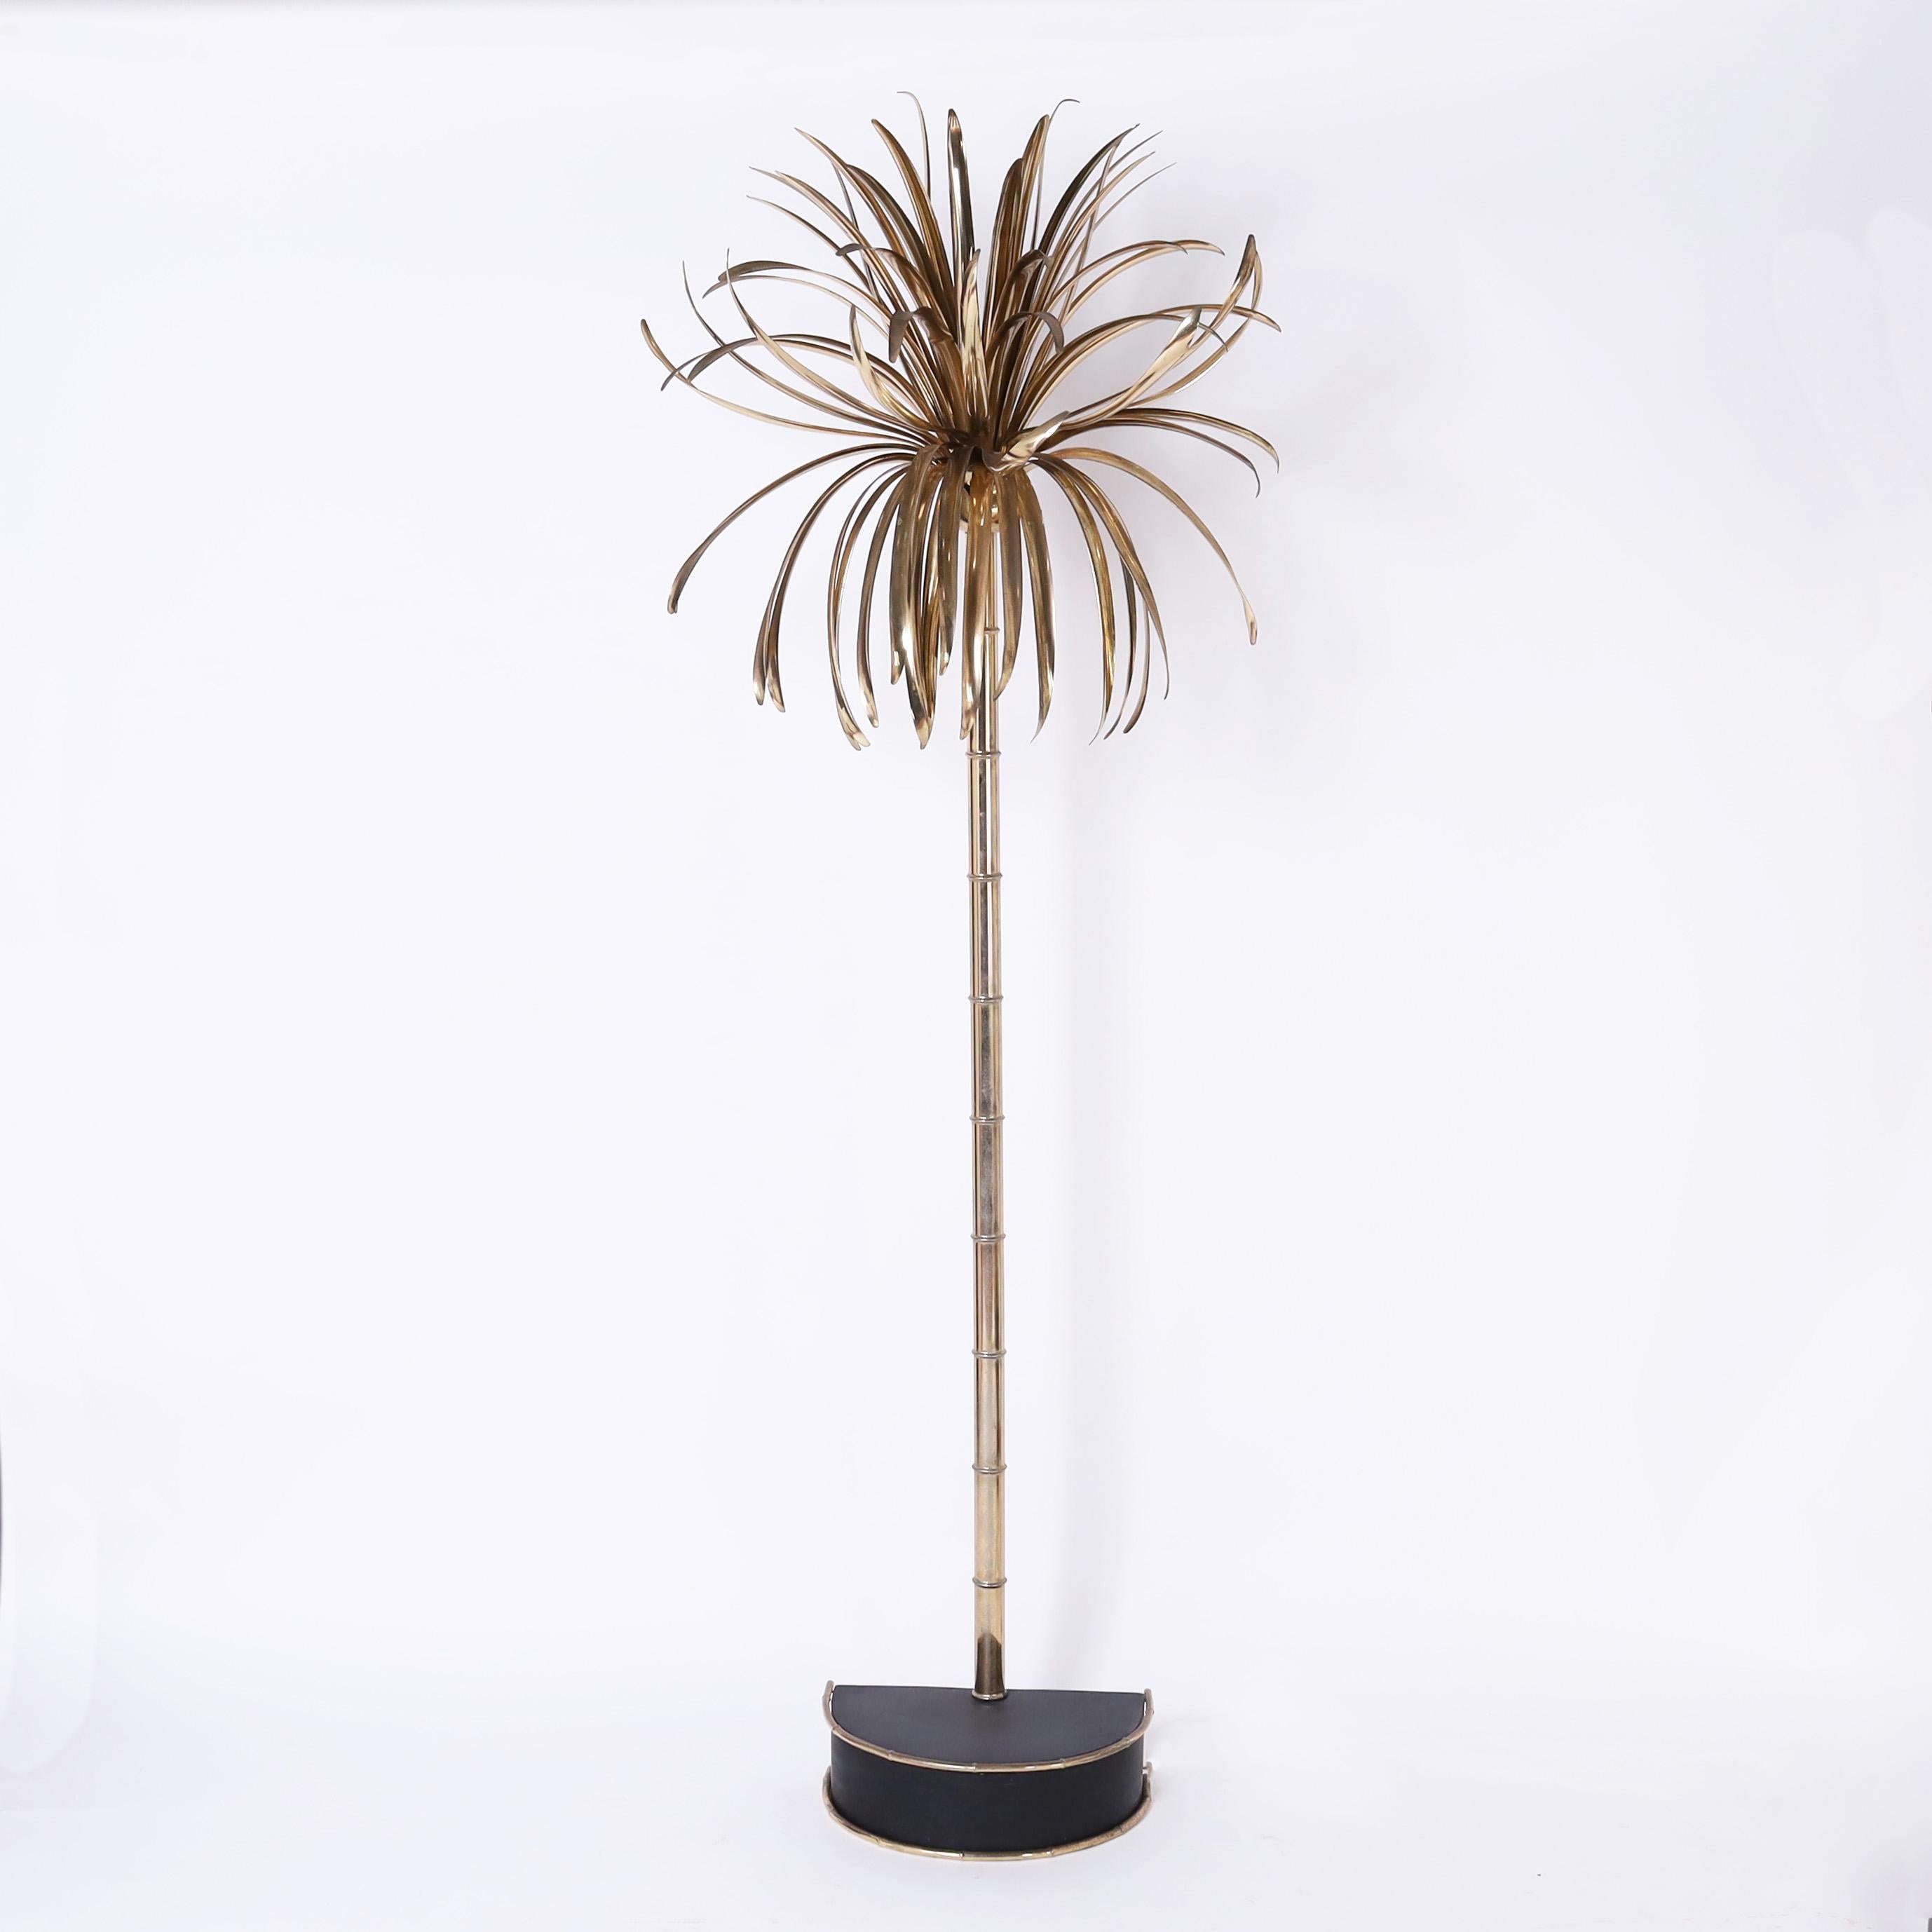 Chic pair of mid century Italian floor lamps crafted with brass plated metal in a stylized palm tree form on a black lacquered demilune base with faux bamboo trim. Signed Casa Bique on the backs. 